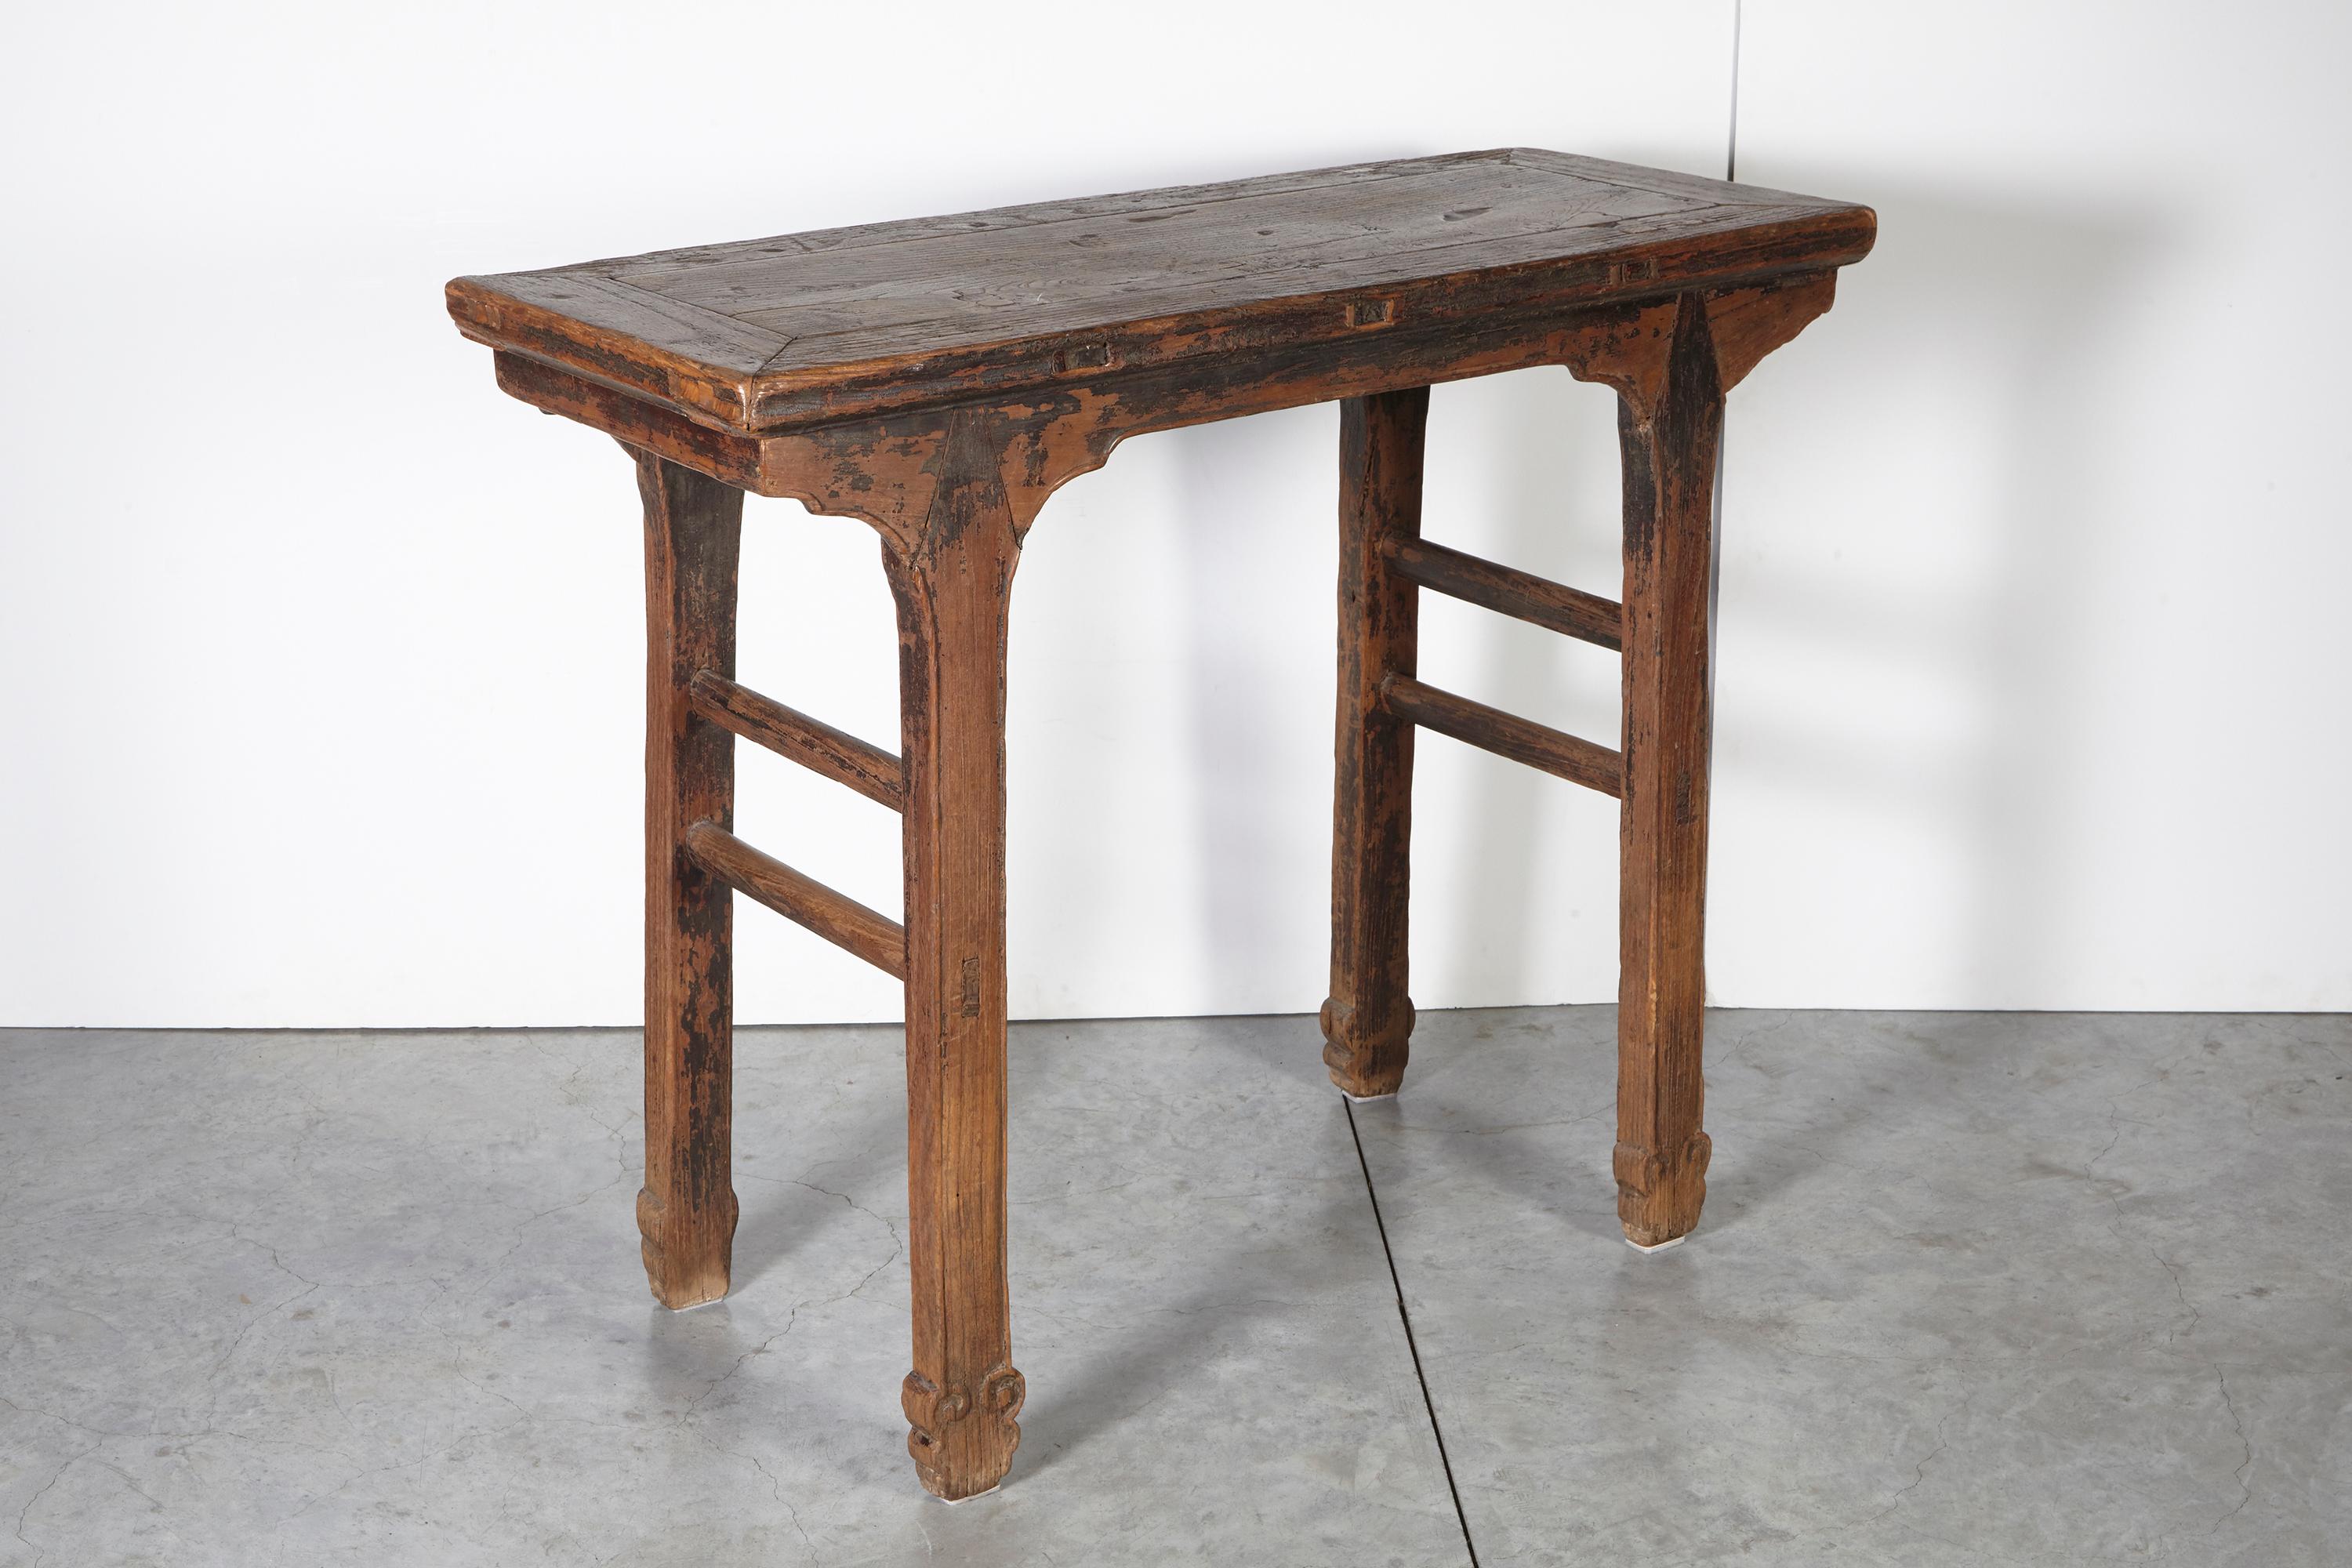 An early 19th (or late 18th) century wine table from Shanxi Province, with simple, clean lines and distinctive arrow shaped tenons joining the legs to the table top. This piece is incredible from every angle, and displays remnants of the original